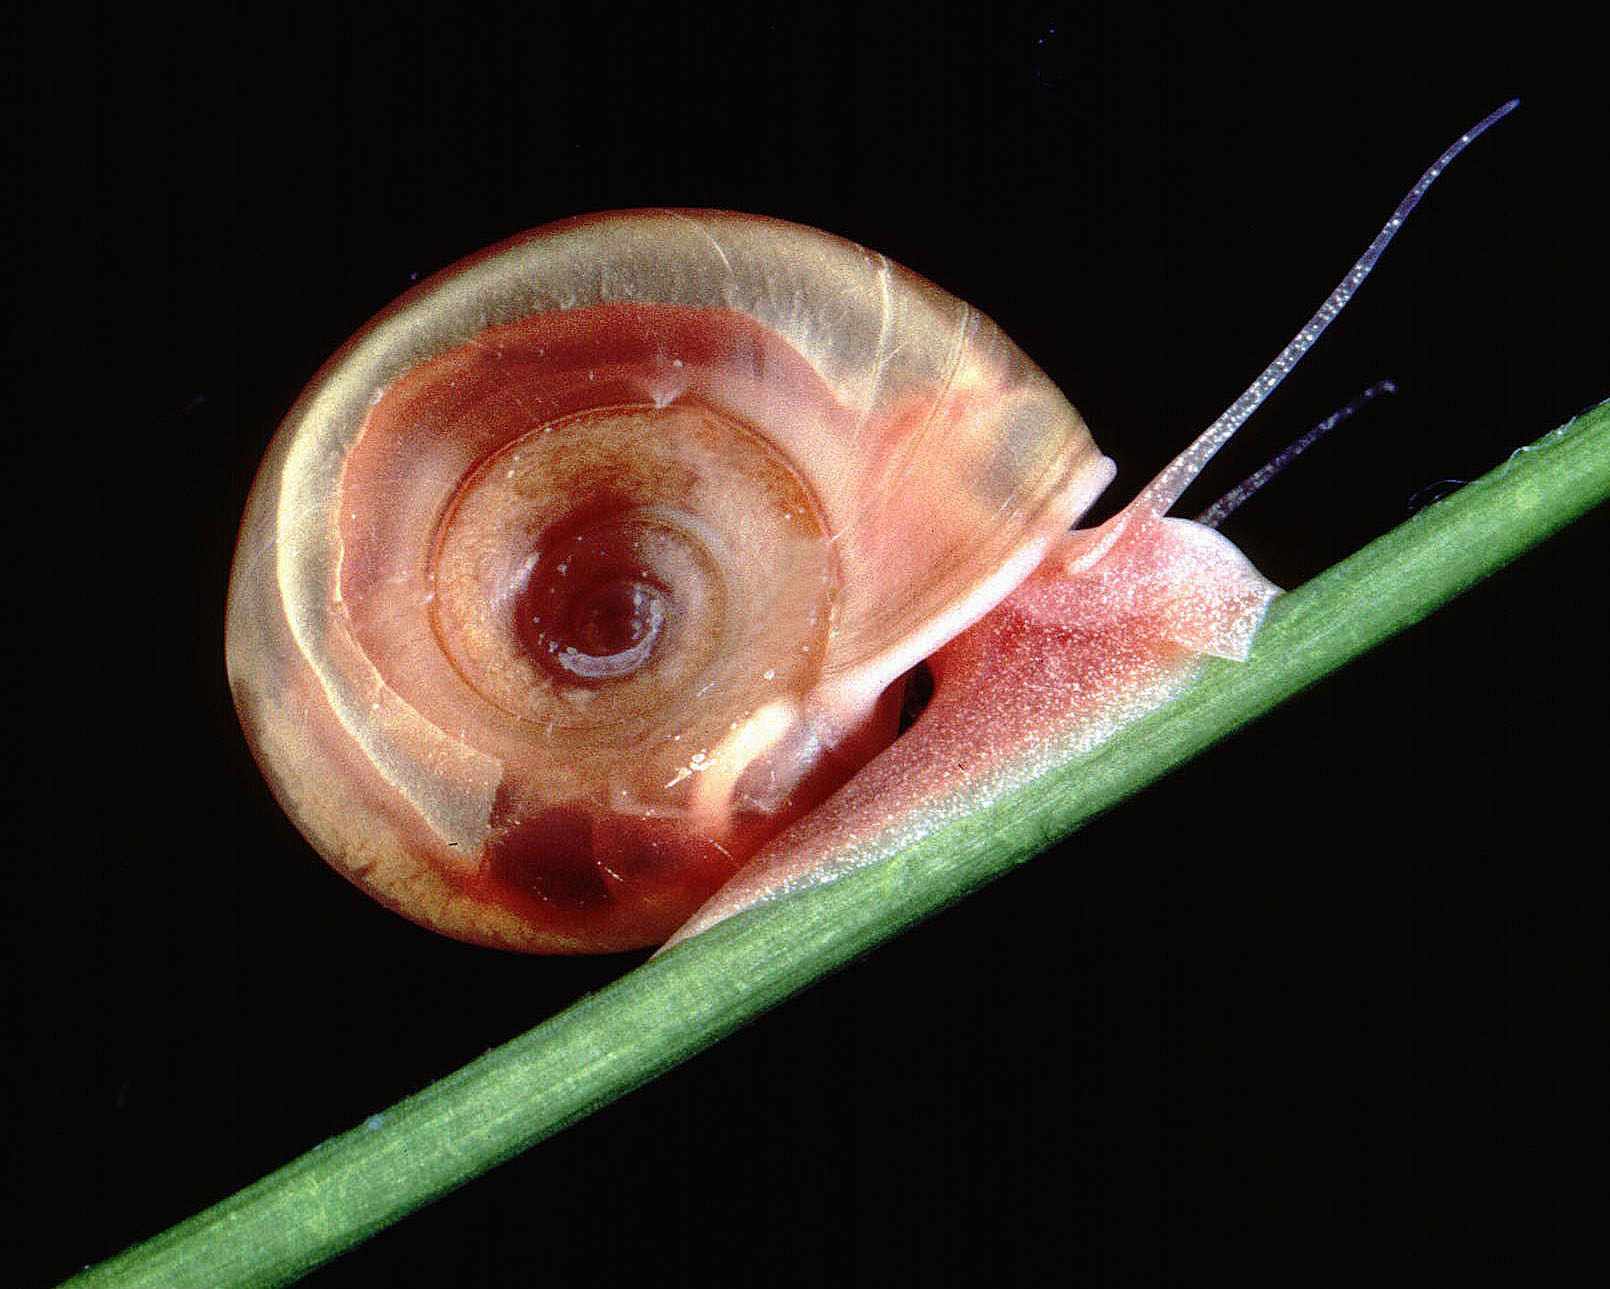 A freshwater snail. By Alan R Walker - Own work, CC BY-SA 3.0, https://commons.wikimedia.org/w/index.php?curid=19033790